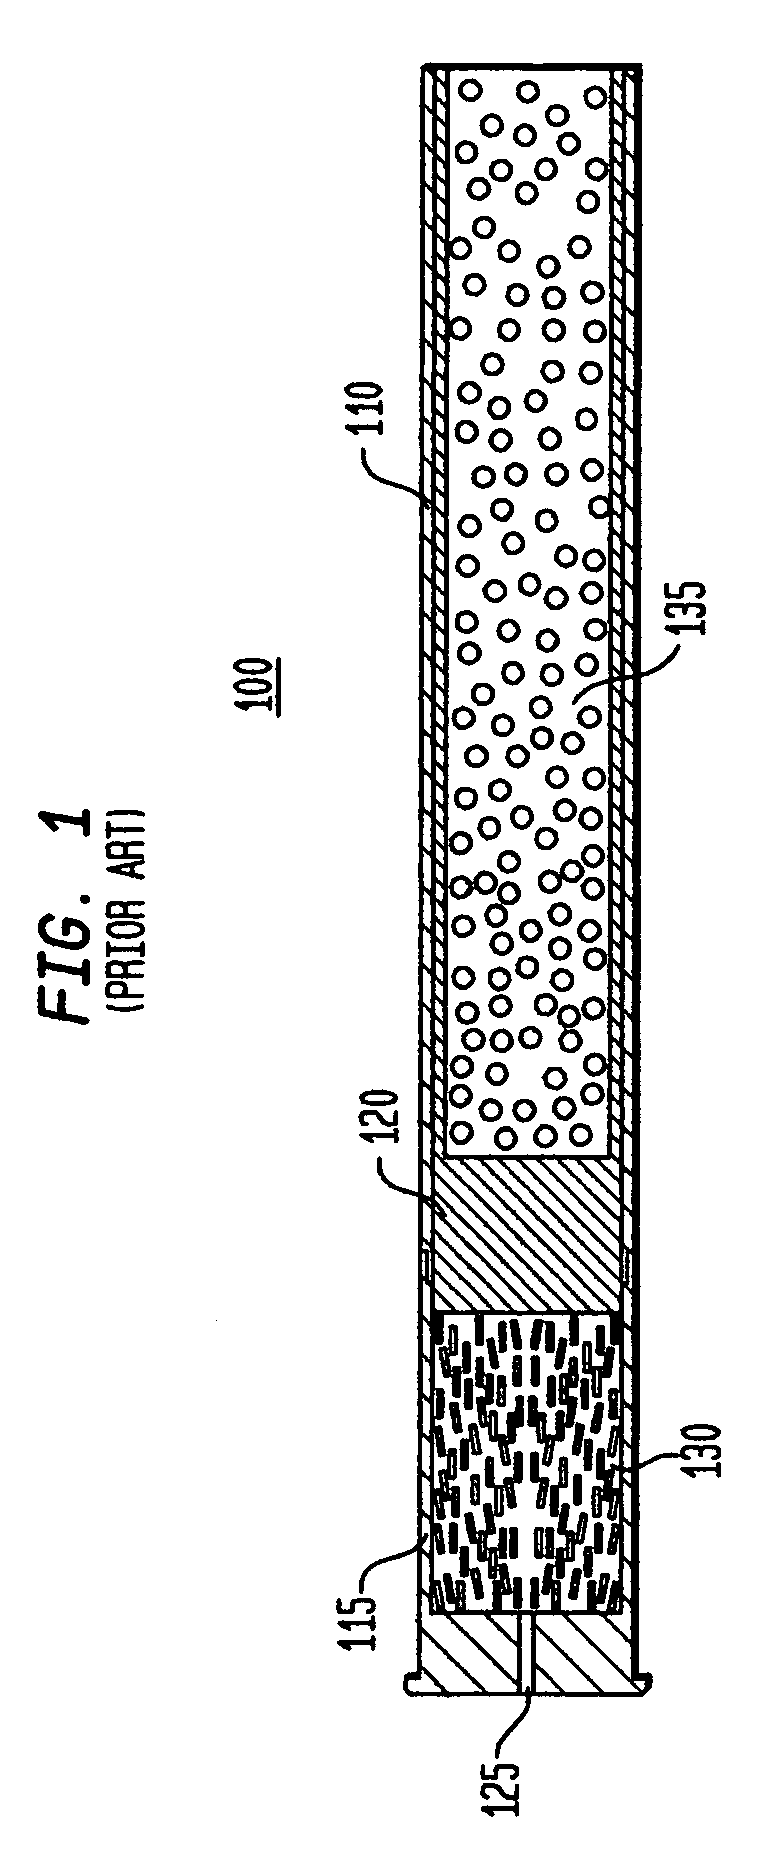 System and method for a flameless tracer / marker for ammunition housing multiple projectiles utilizing chemlucent chemicals